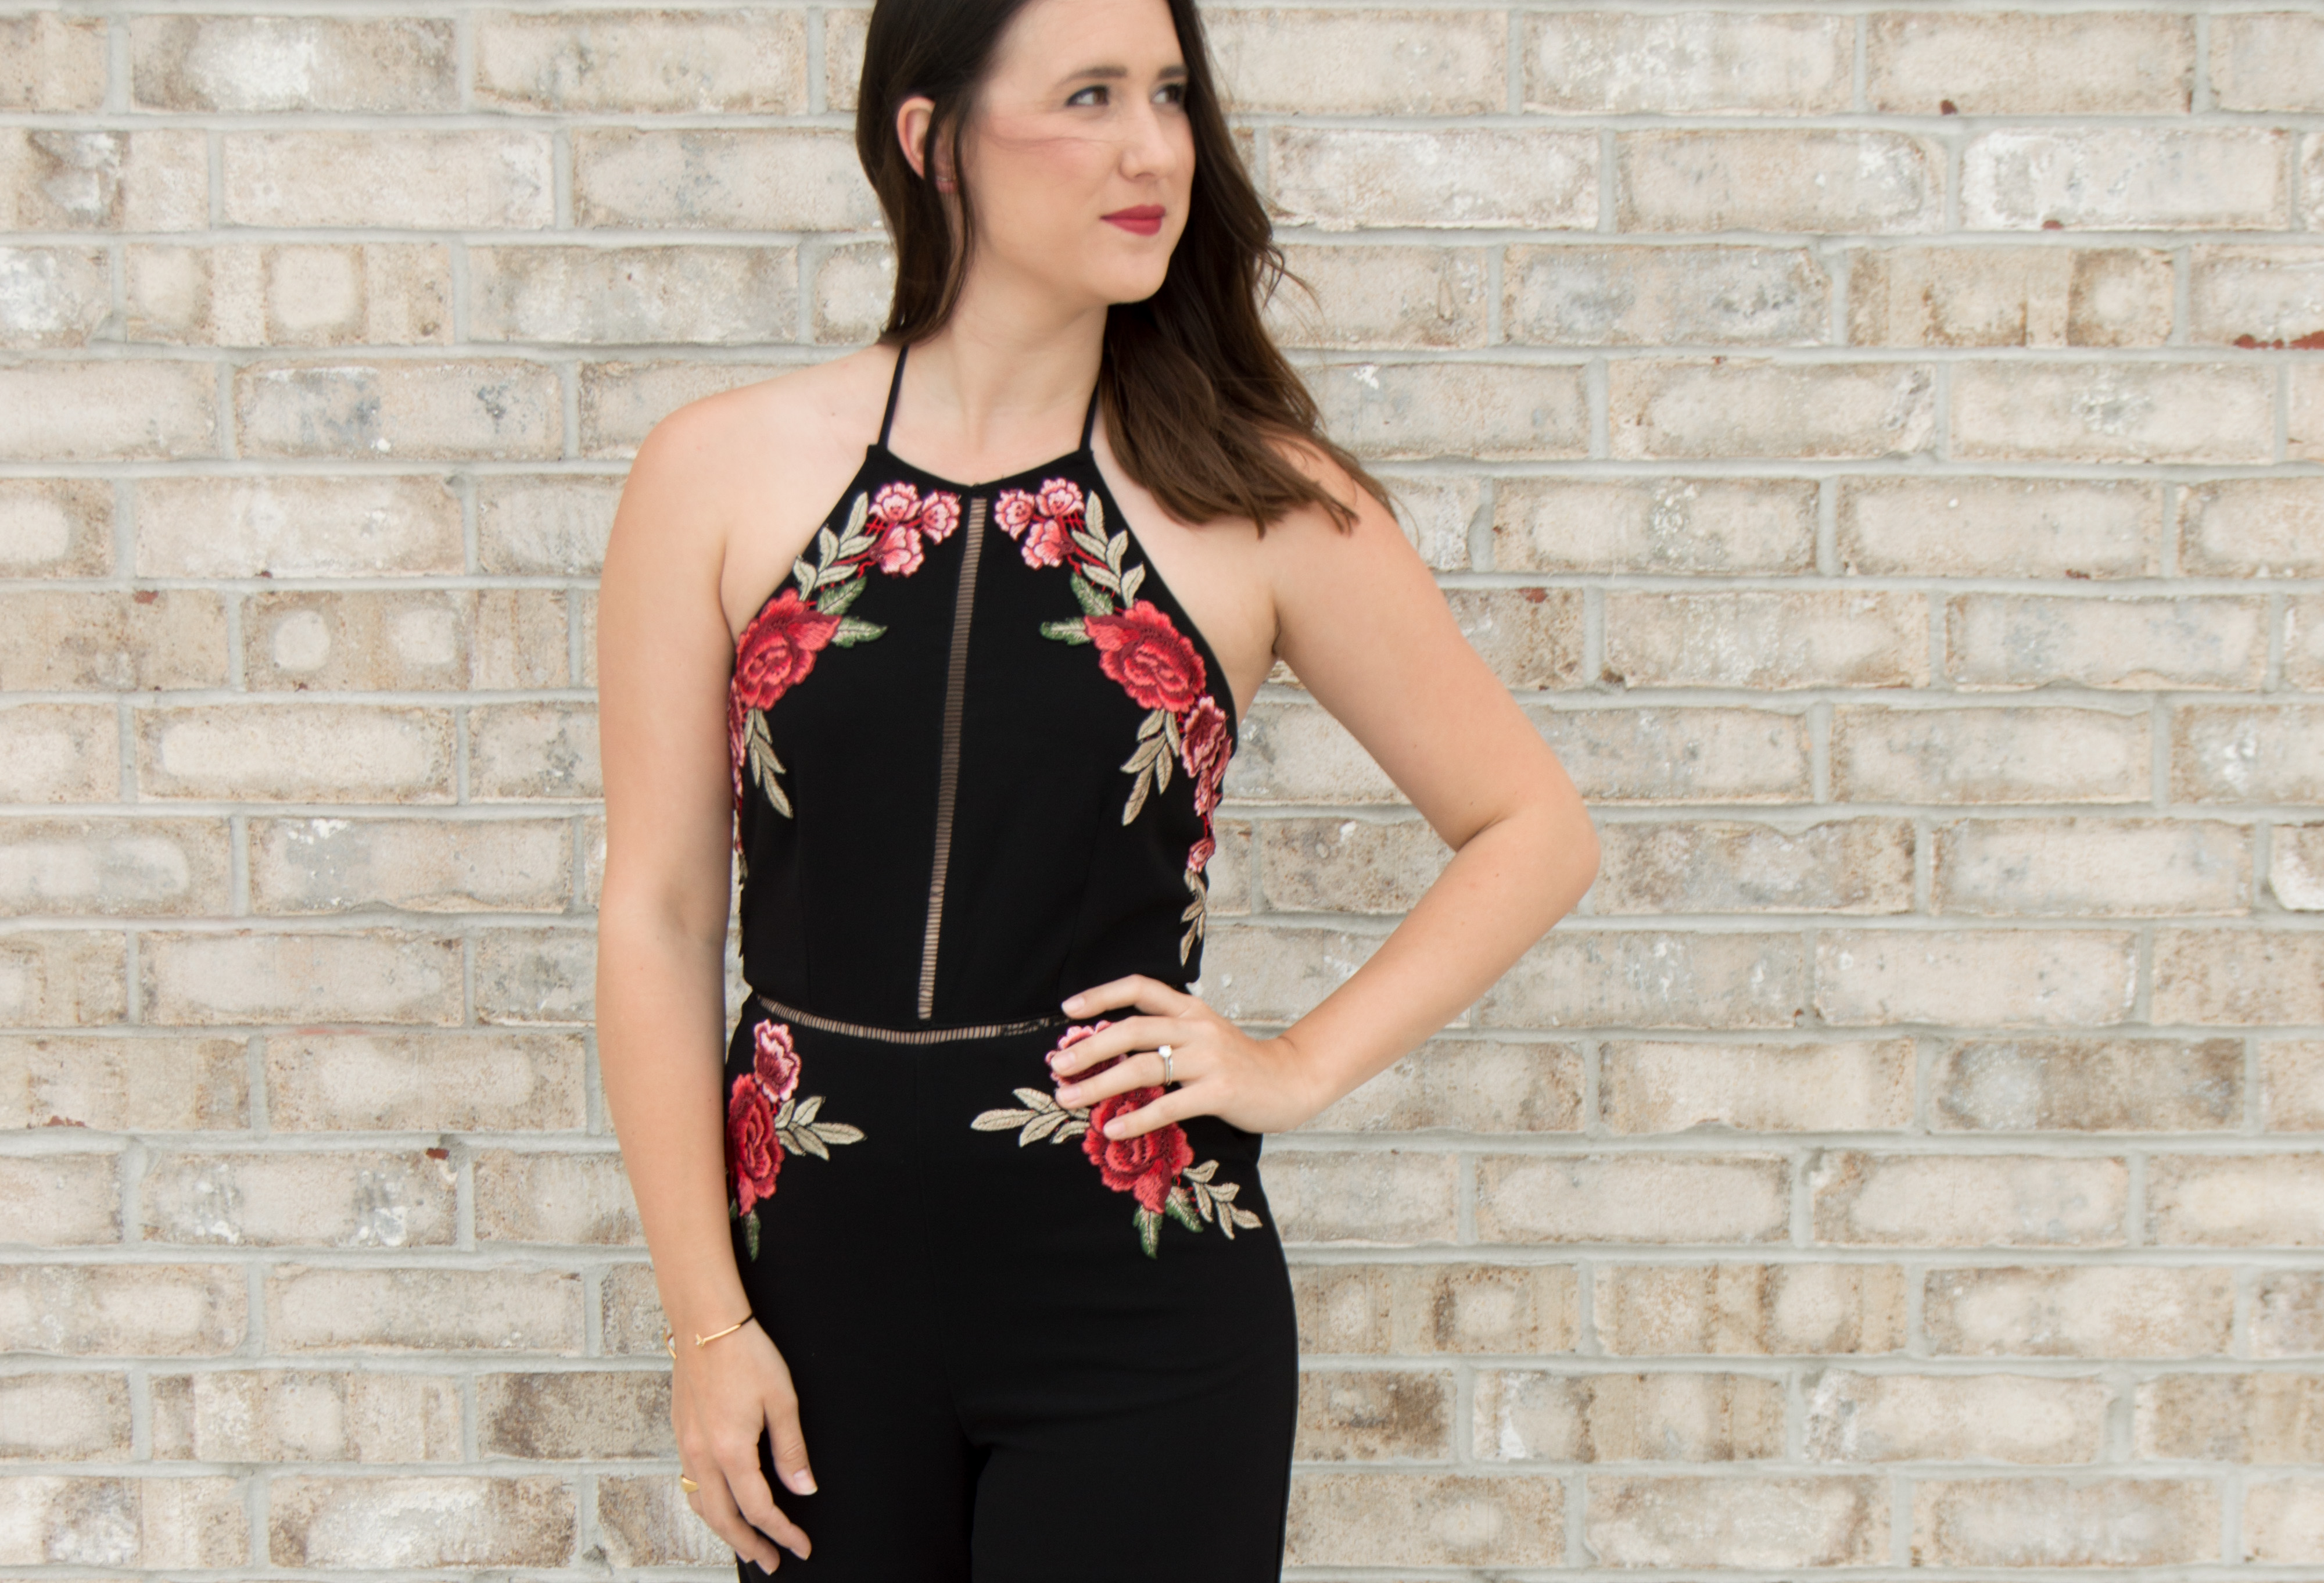 gianni bini floral embroidered jumpsuit | women's fashion